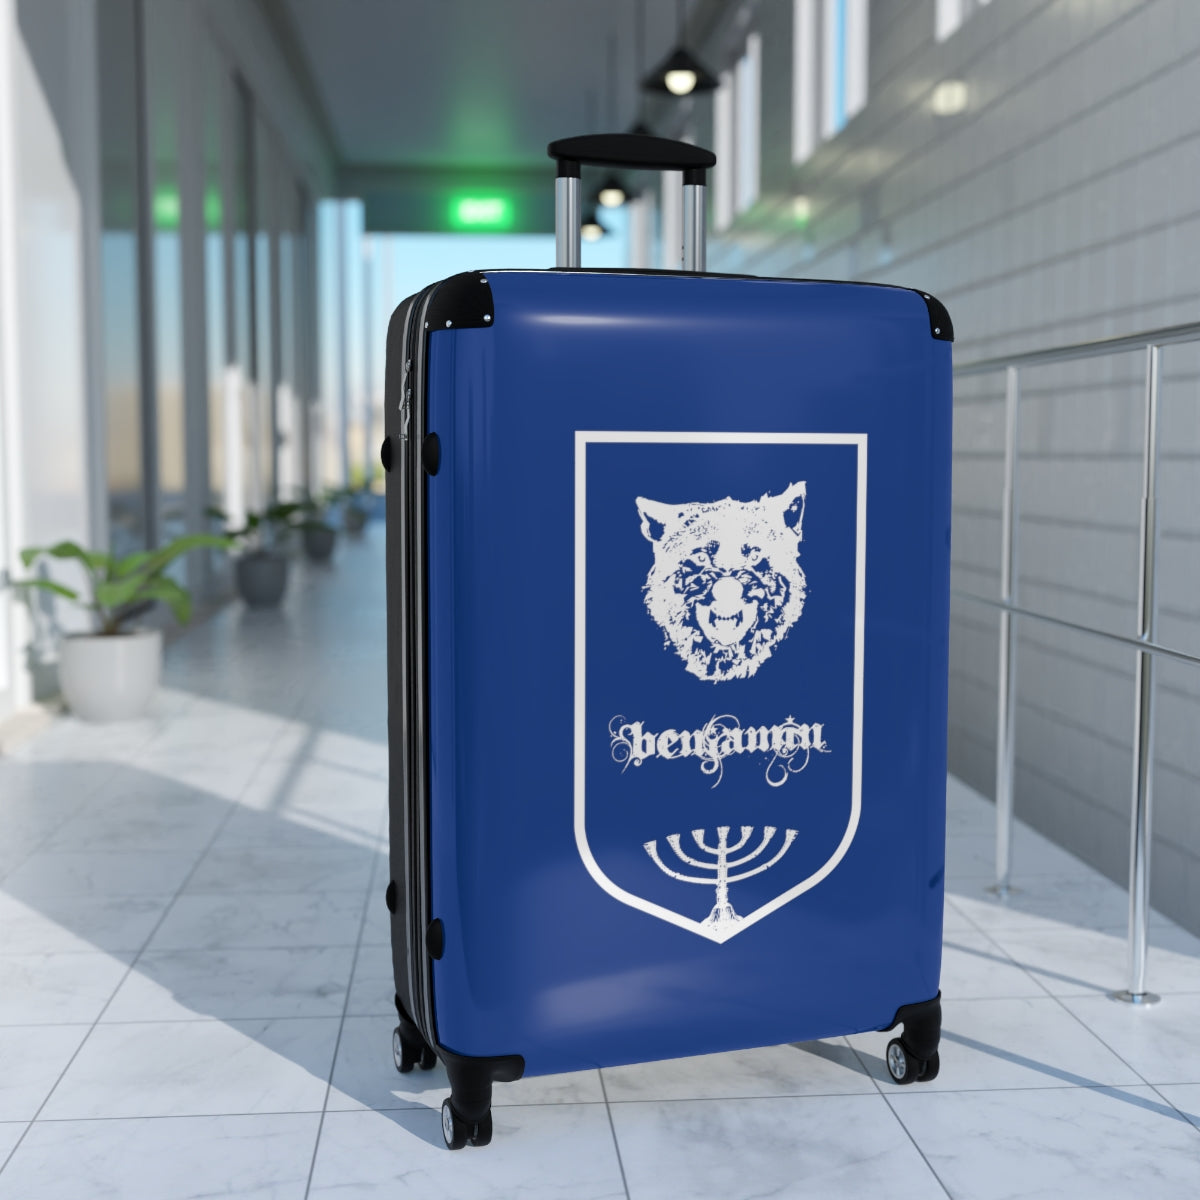 Getrott Tribes of Israel Benjamin Blue Cabin Suitcase Inner Pockets Extended Storage Adjustable Telescopic Handle Inner Pockets Double wheeled Polycarbonate Hard-shell Built-in Lock